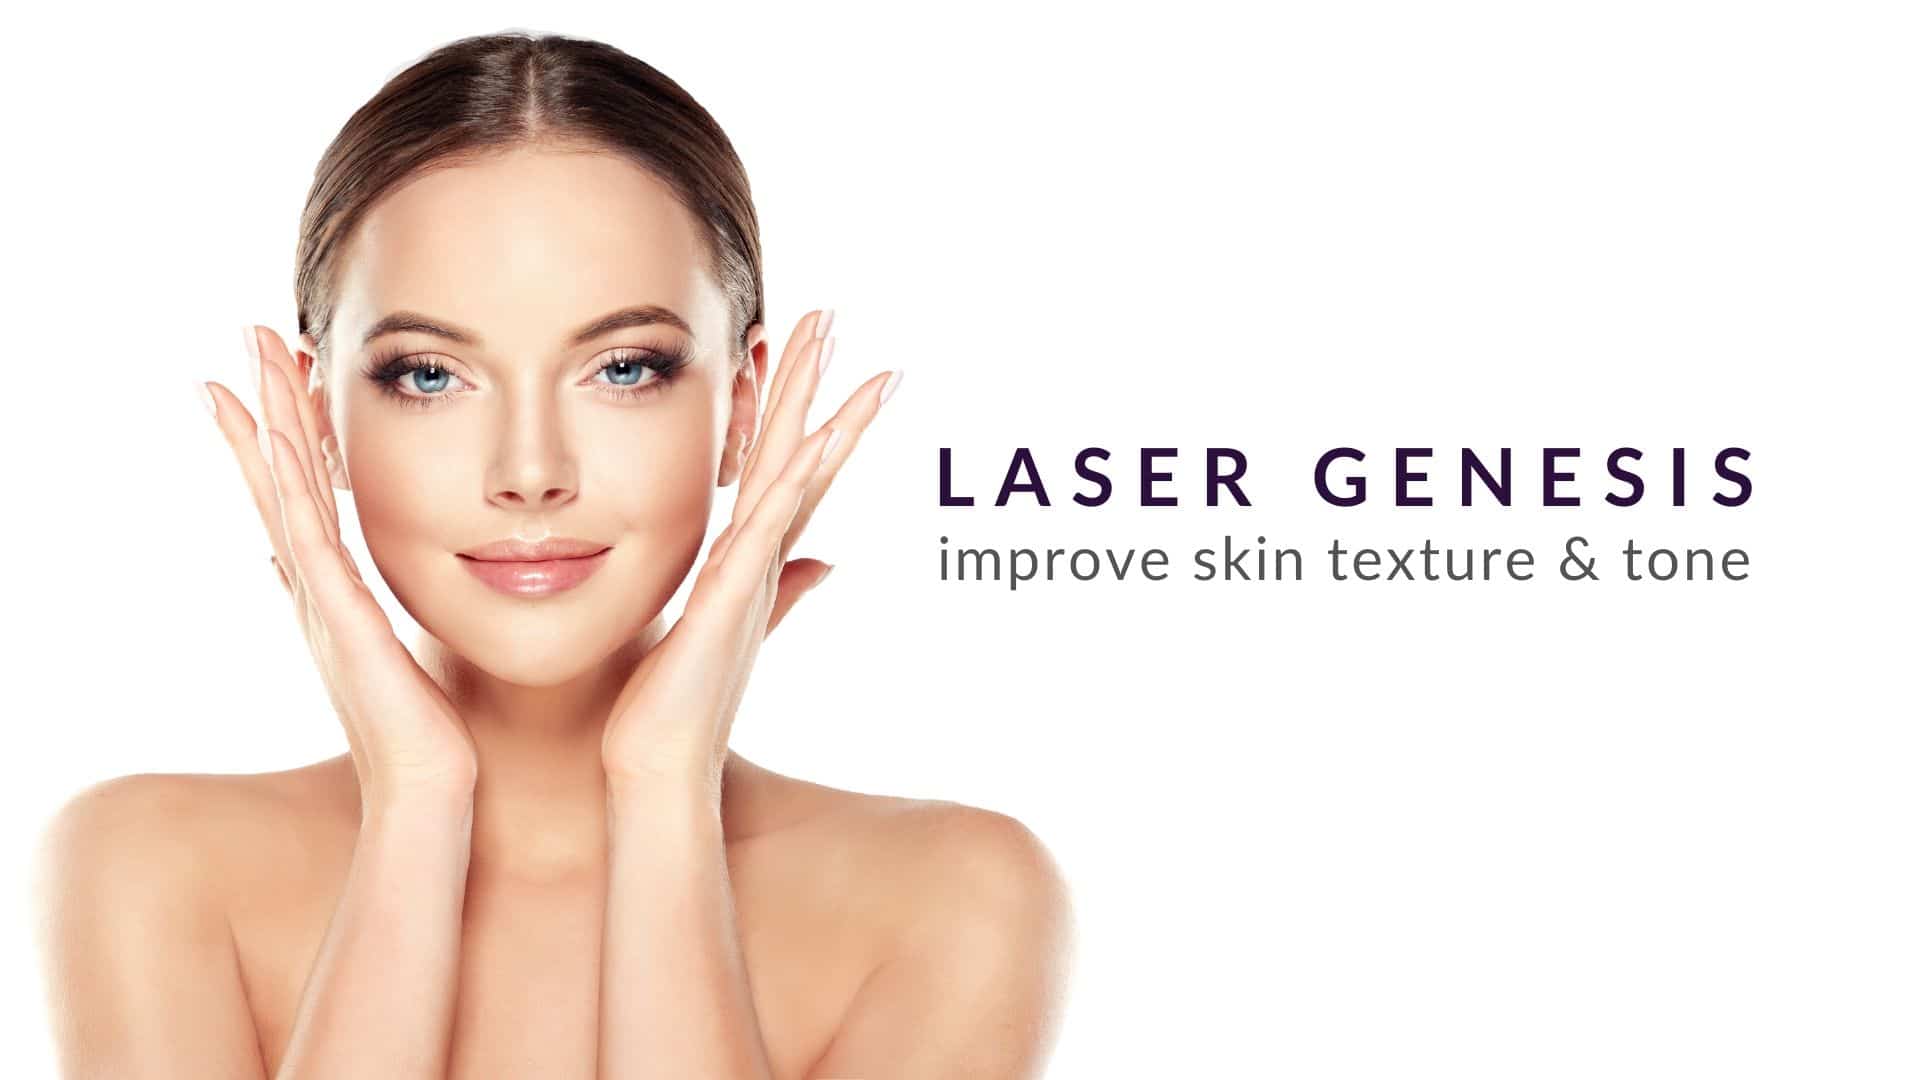 Laser Genesis at advanced rejuvenation center for improved skin texture and tone in Purchase, NY.